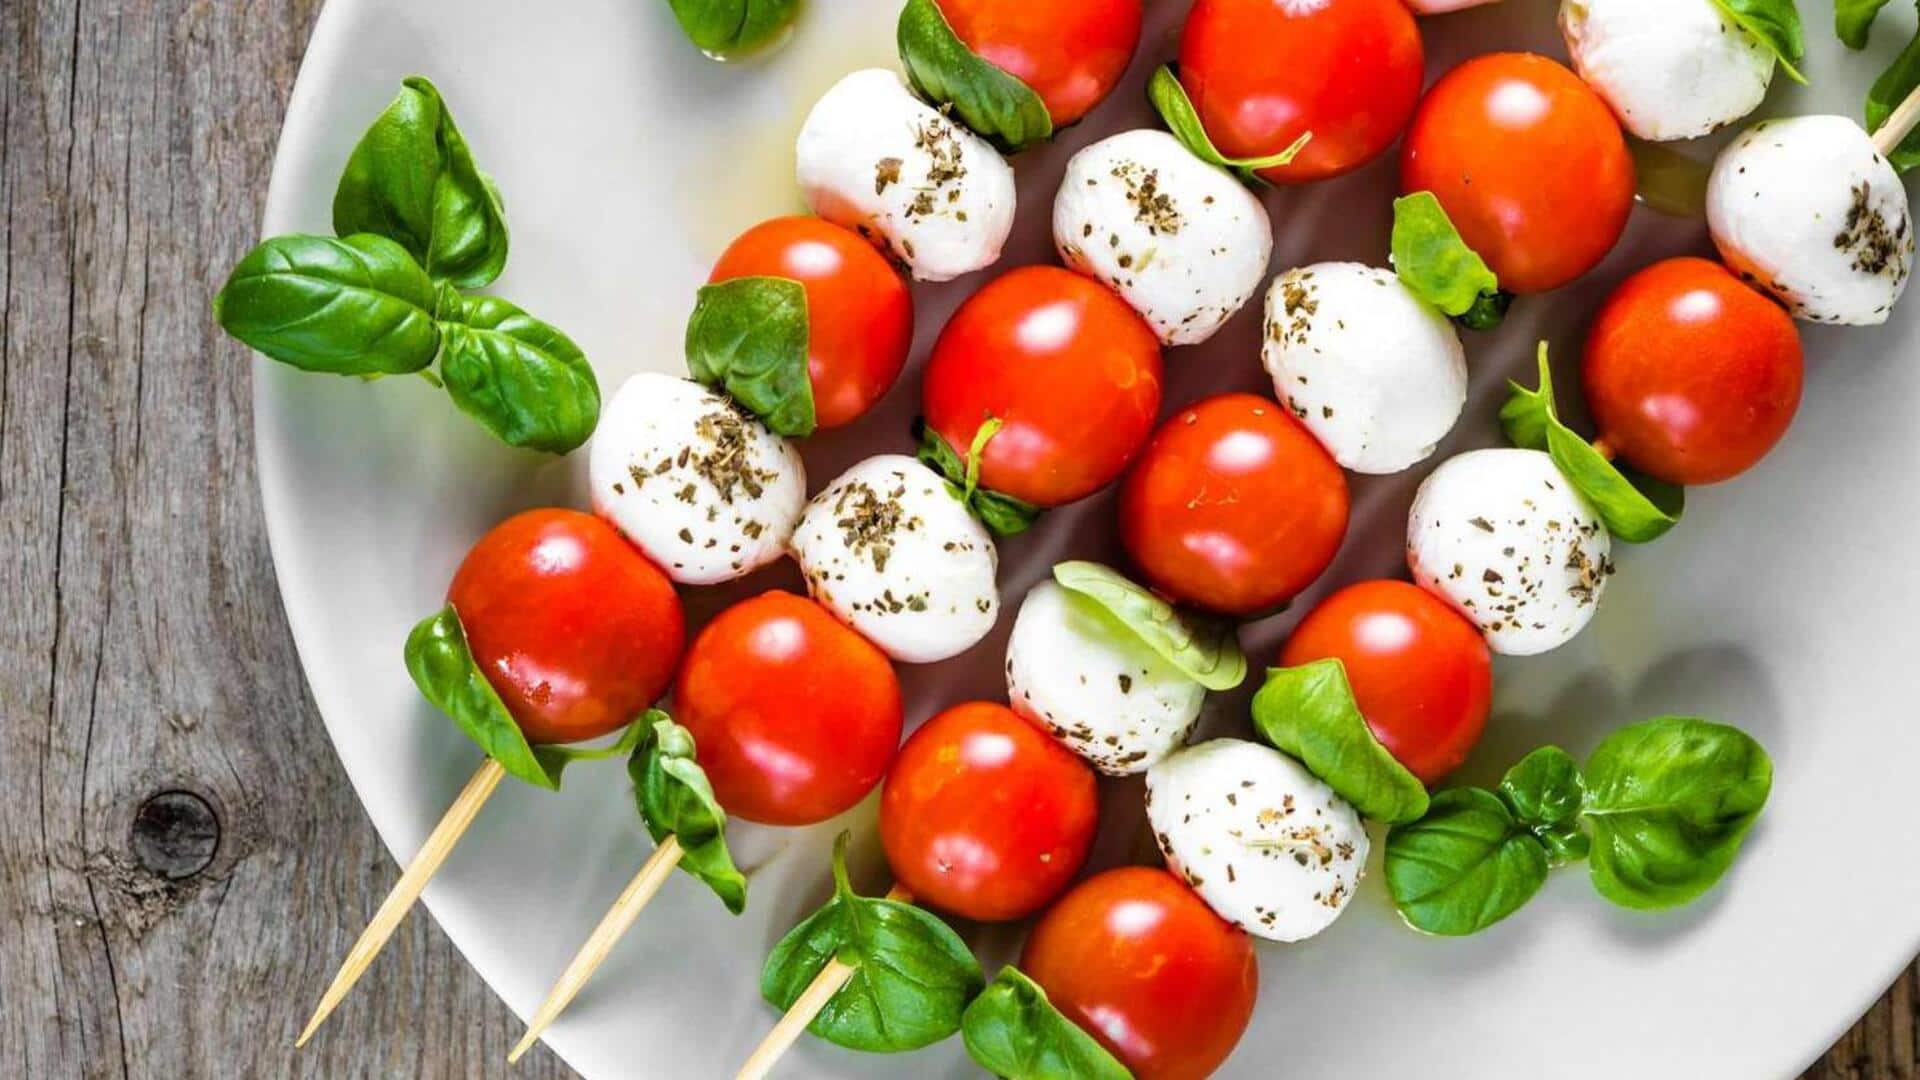 Try this Italian caprese skewers with balsamic glaze recipe